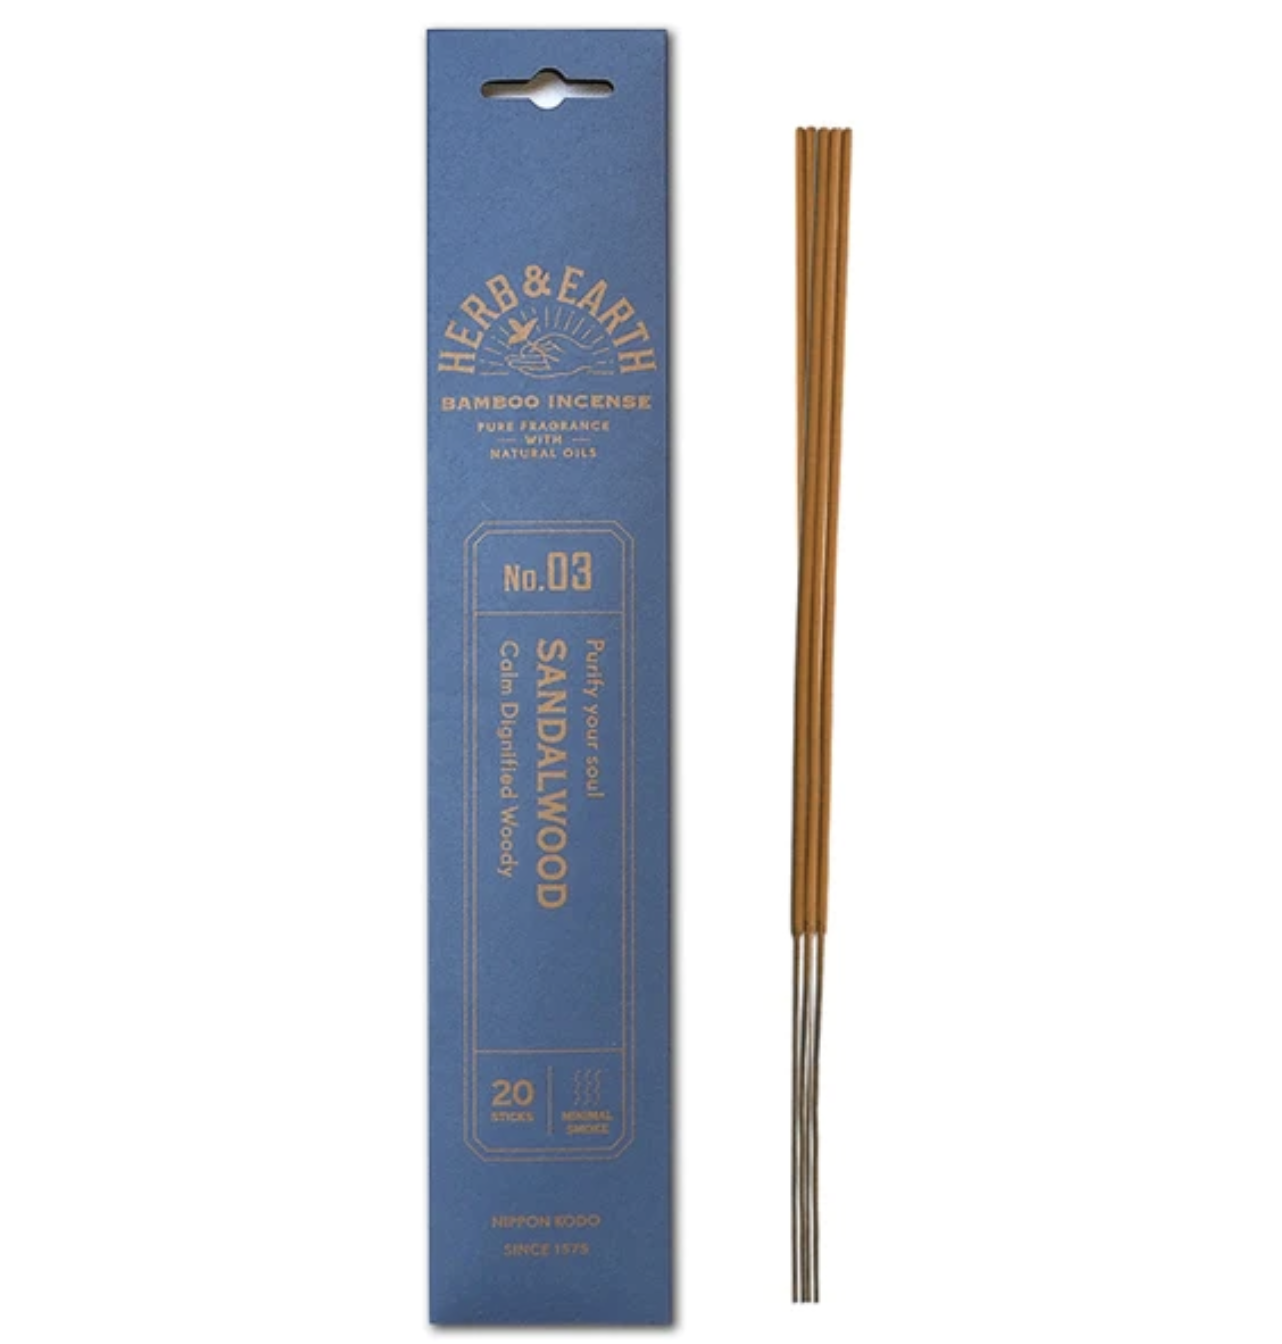 HERB & EARTH Japanese bamboo incense